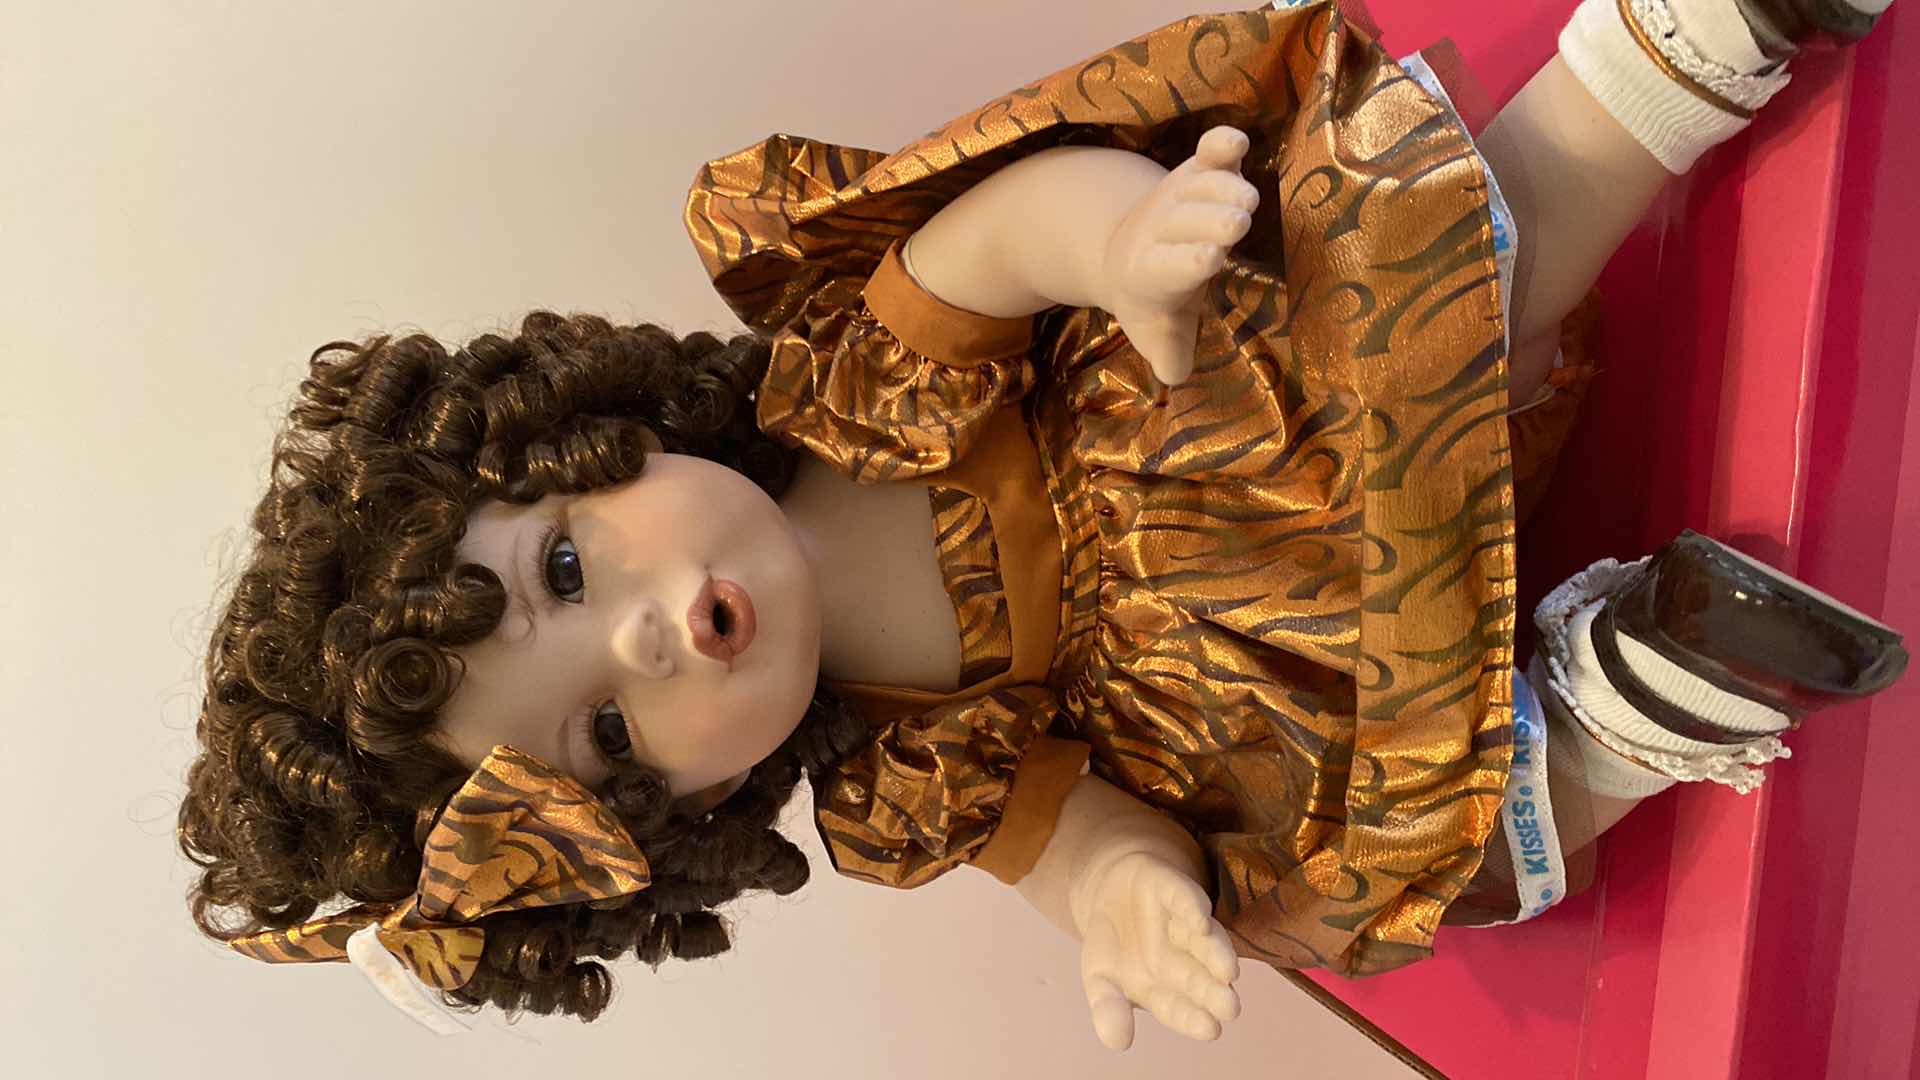 Photo 2 of MARIE OSMOND FINE PORCELAIN COLLECTIBLES DOLL CARAMEL KISSES H 13” FROM SITTING POSITION $225